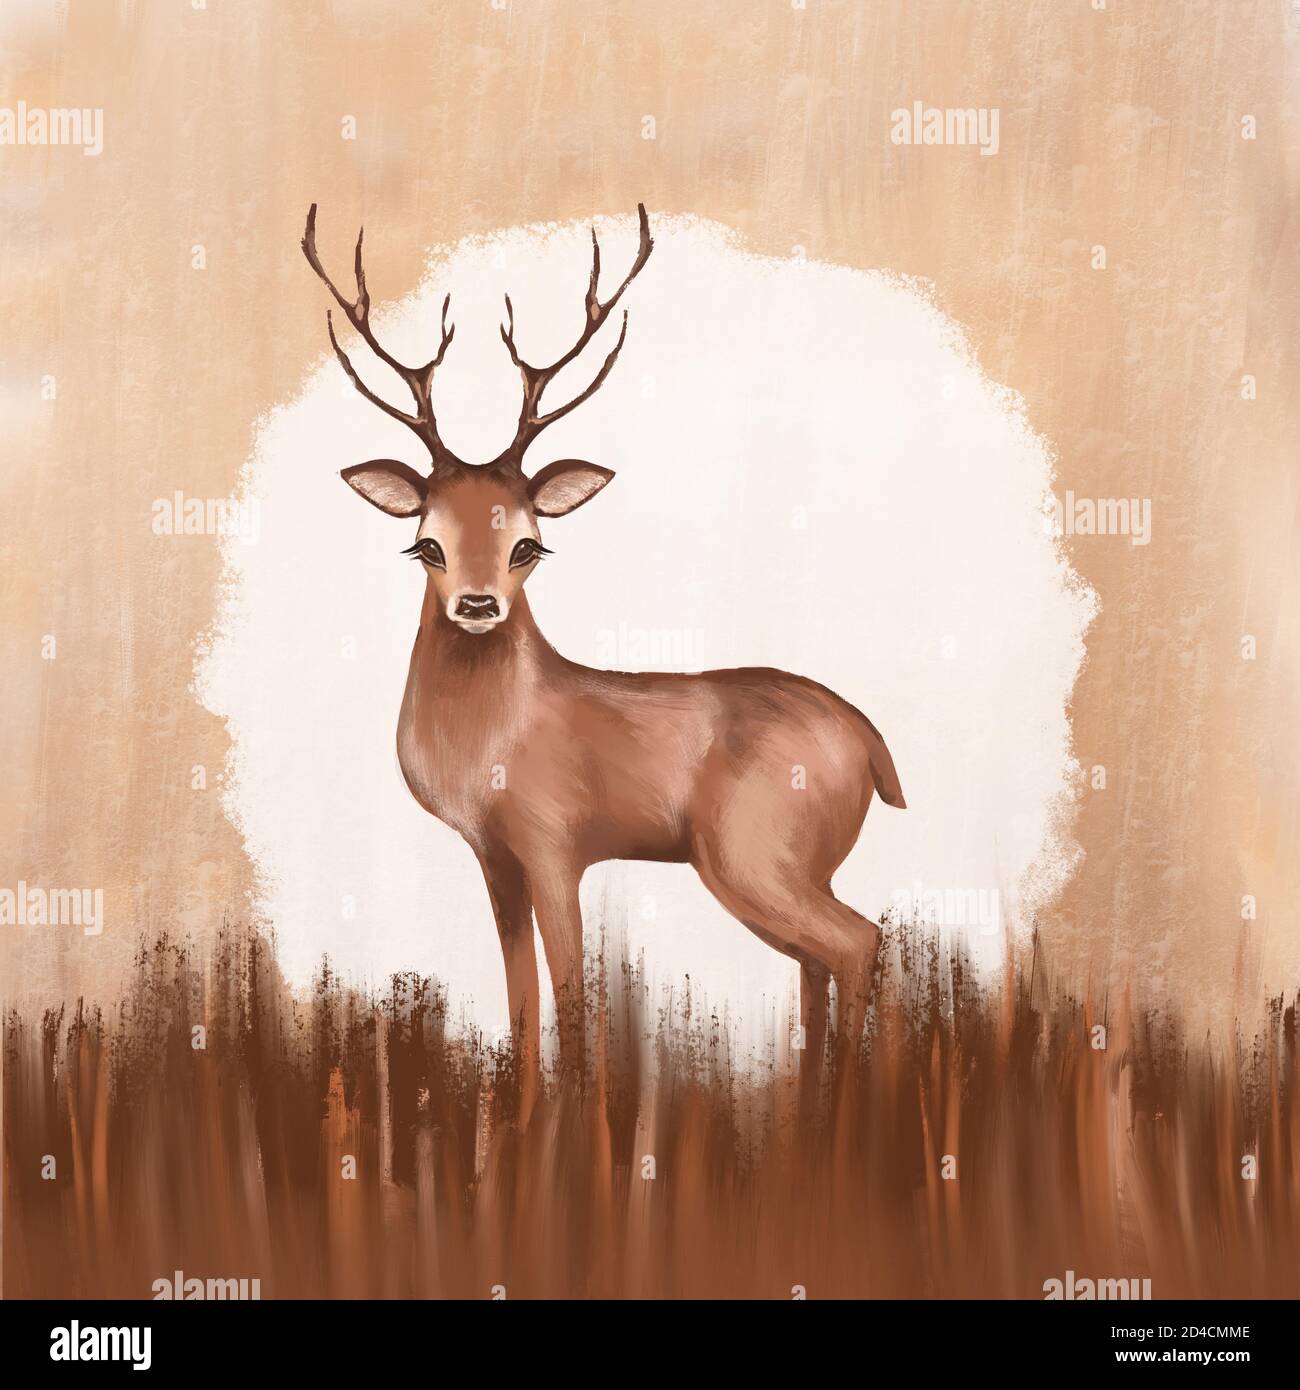 Cute illustration with deer. Forest animal Stock Photo